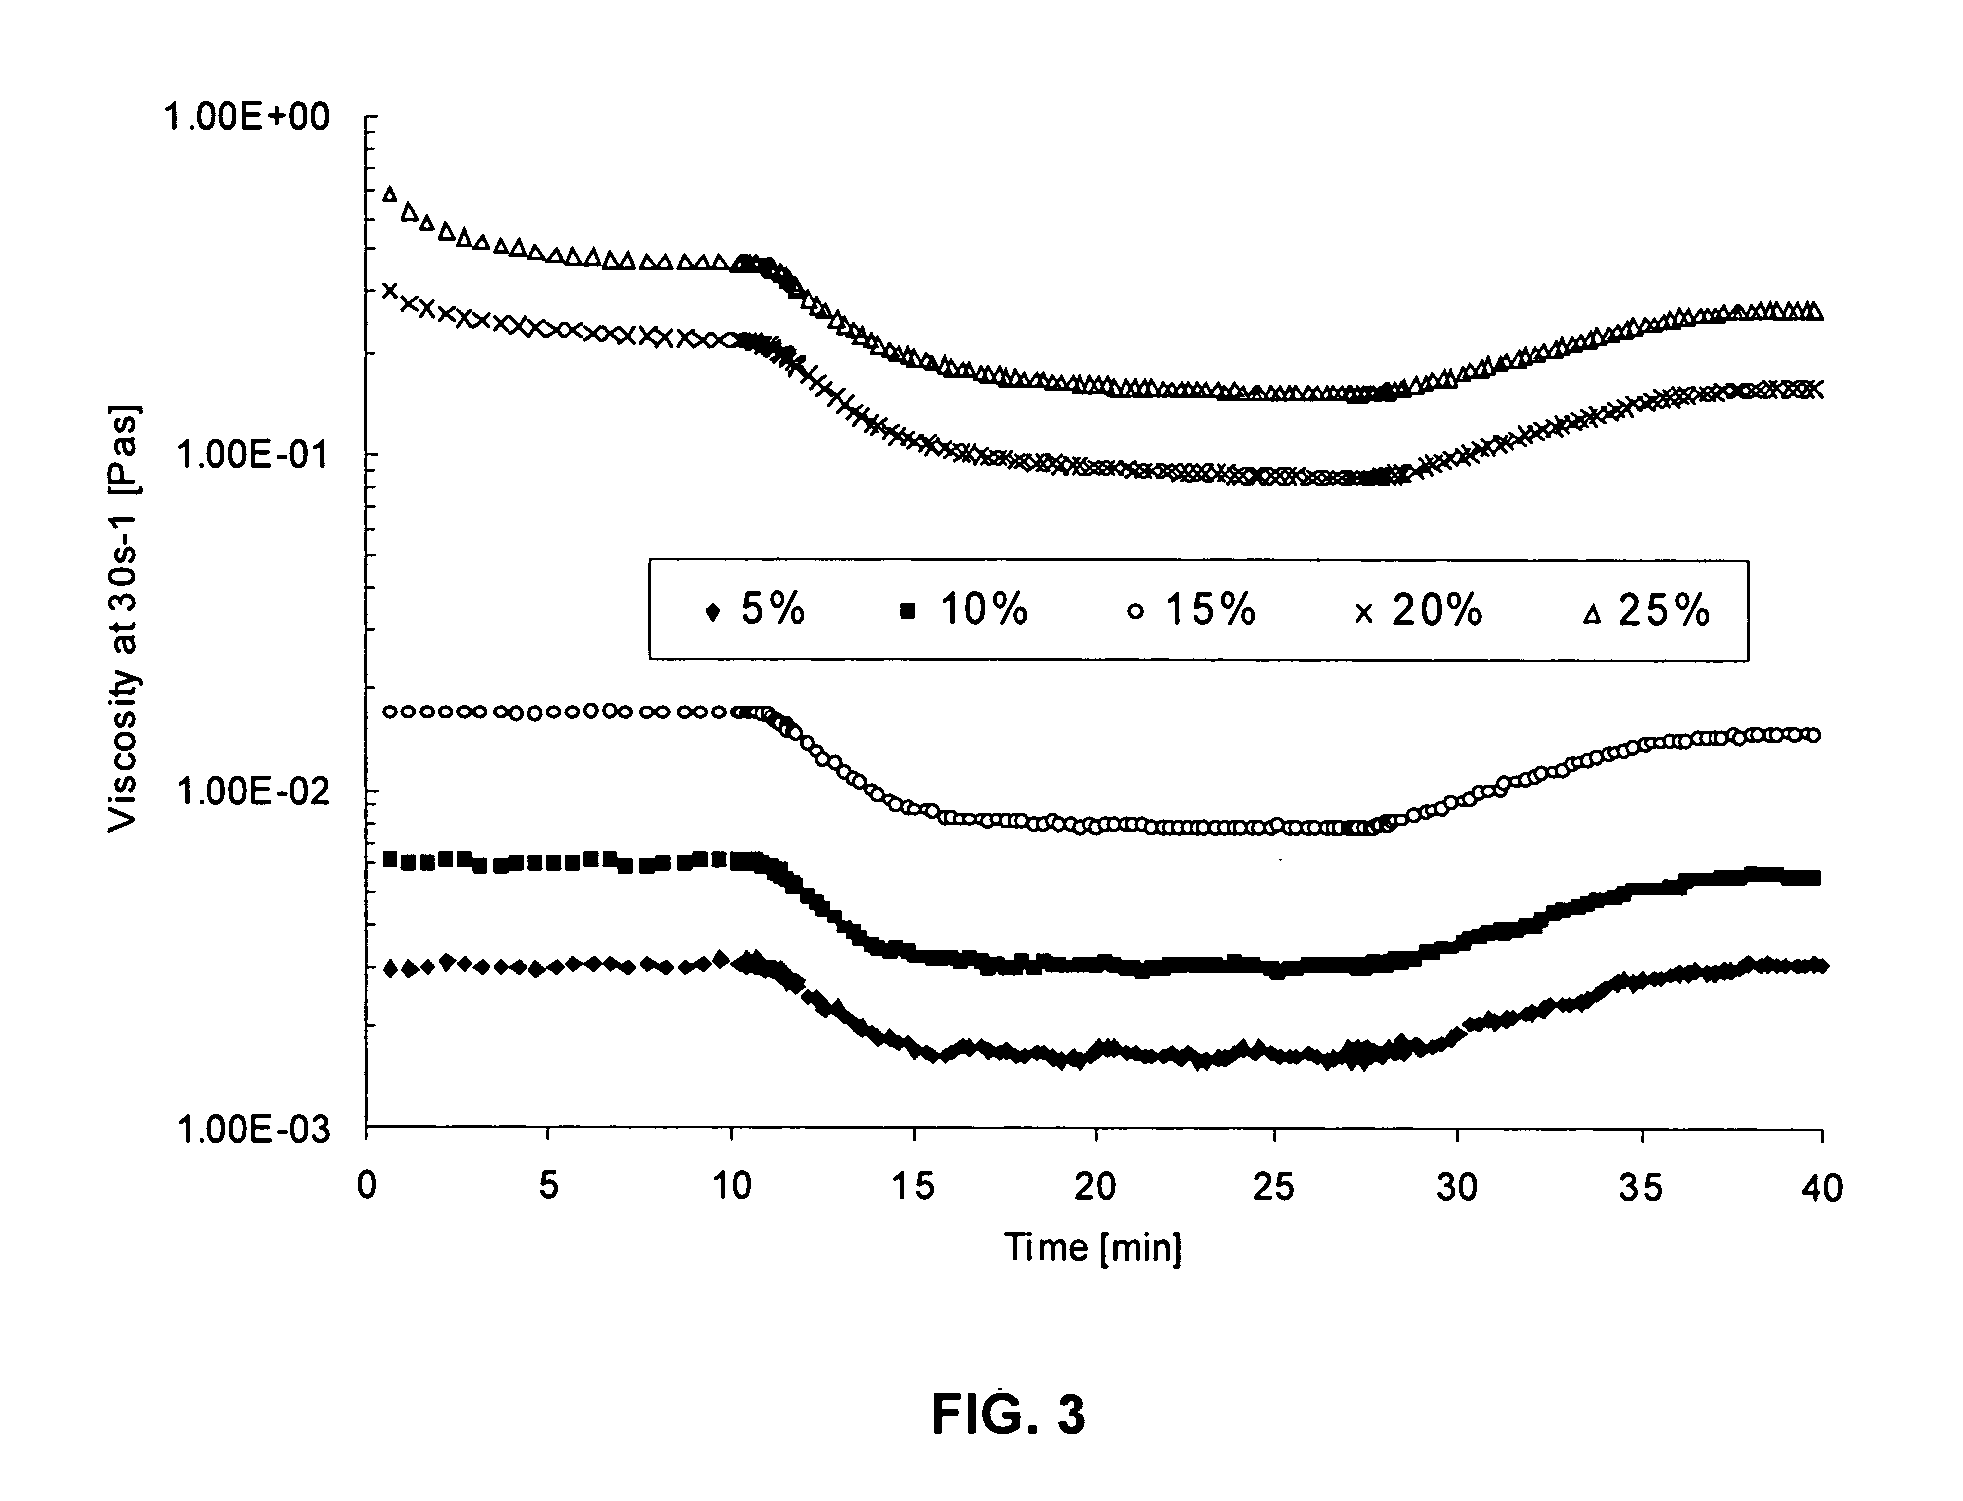 Chocolate products and ingredients and methods for producing novel oil-in-water suspensions